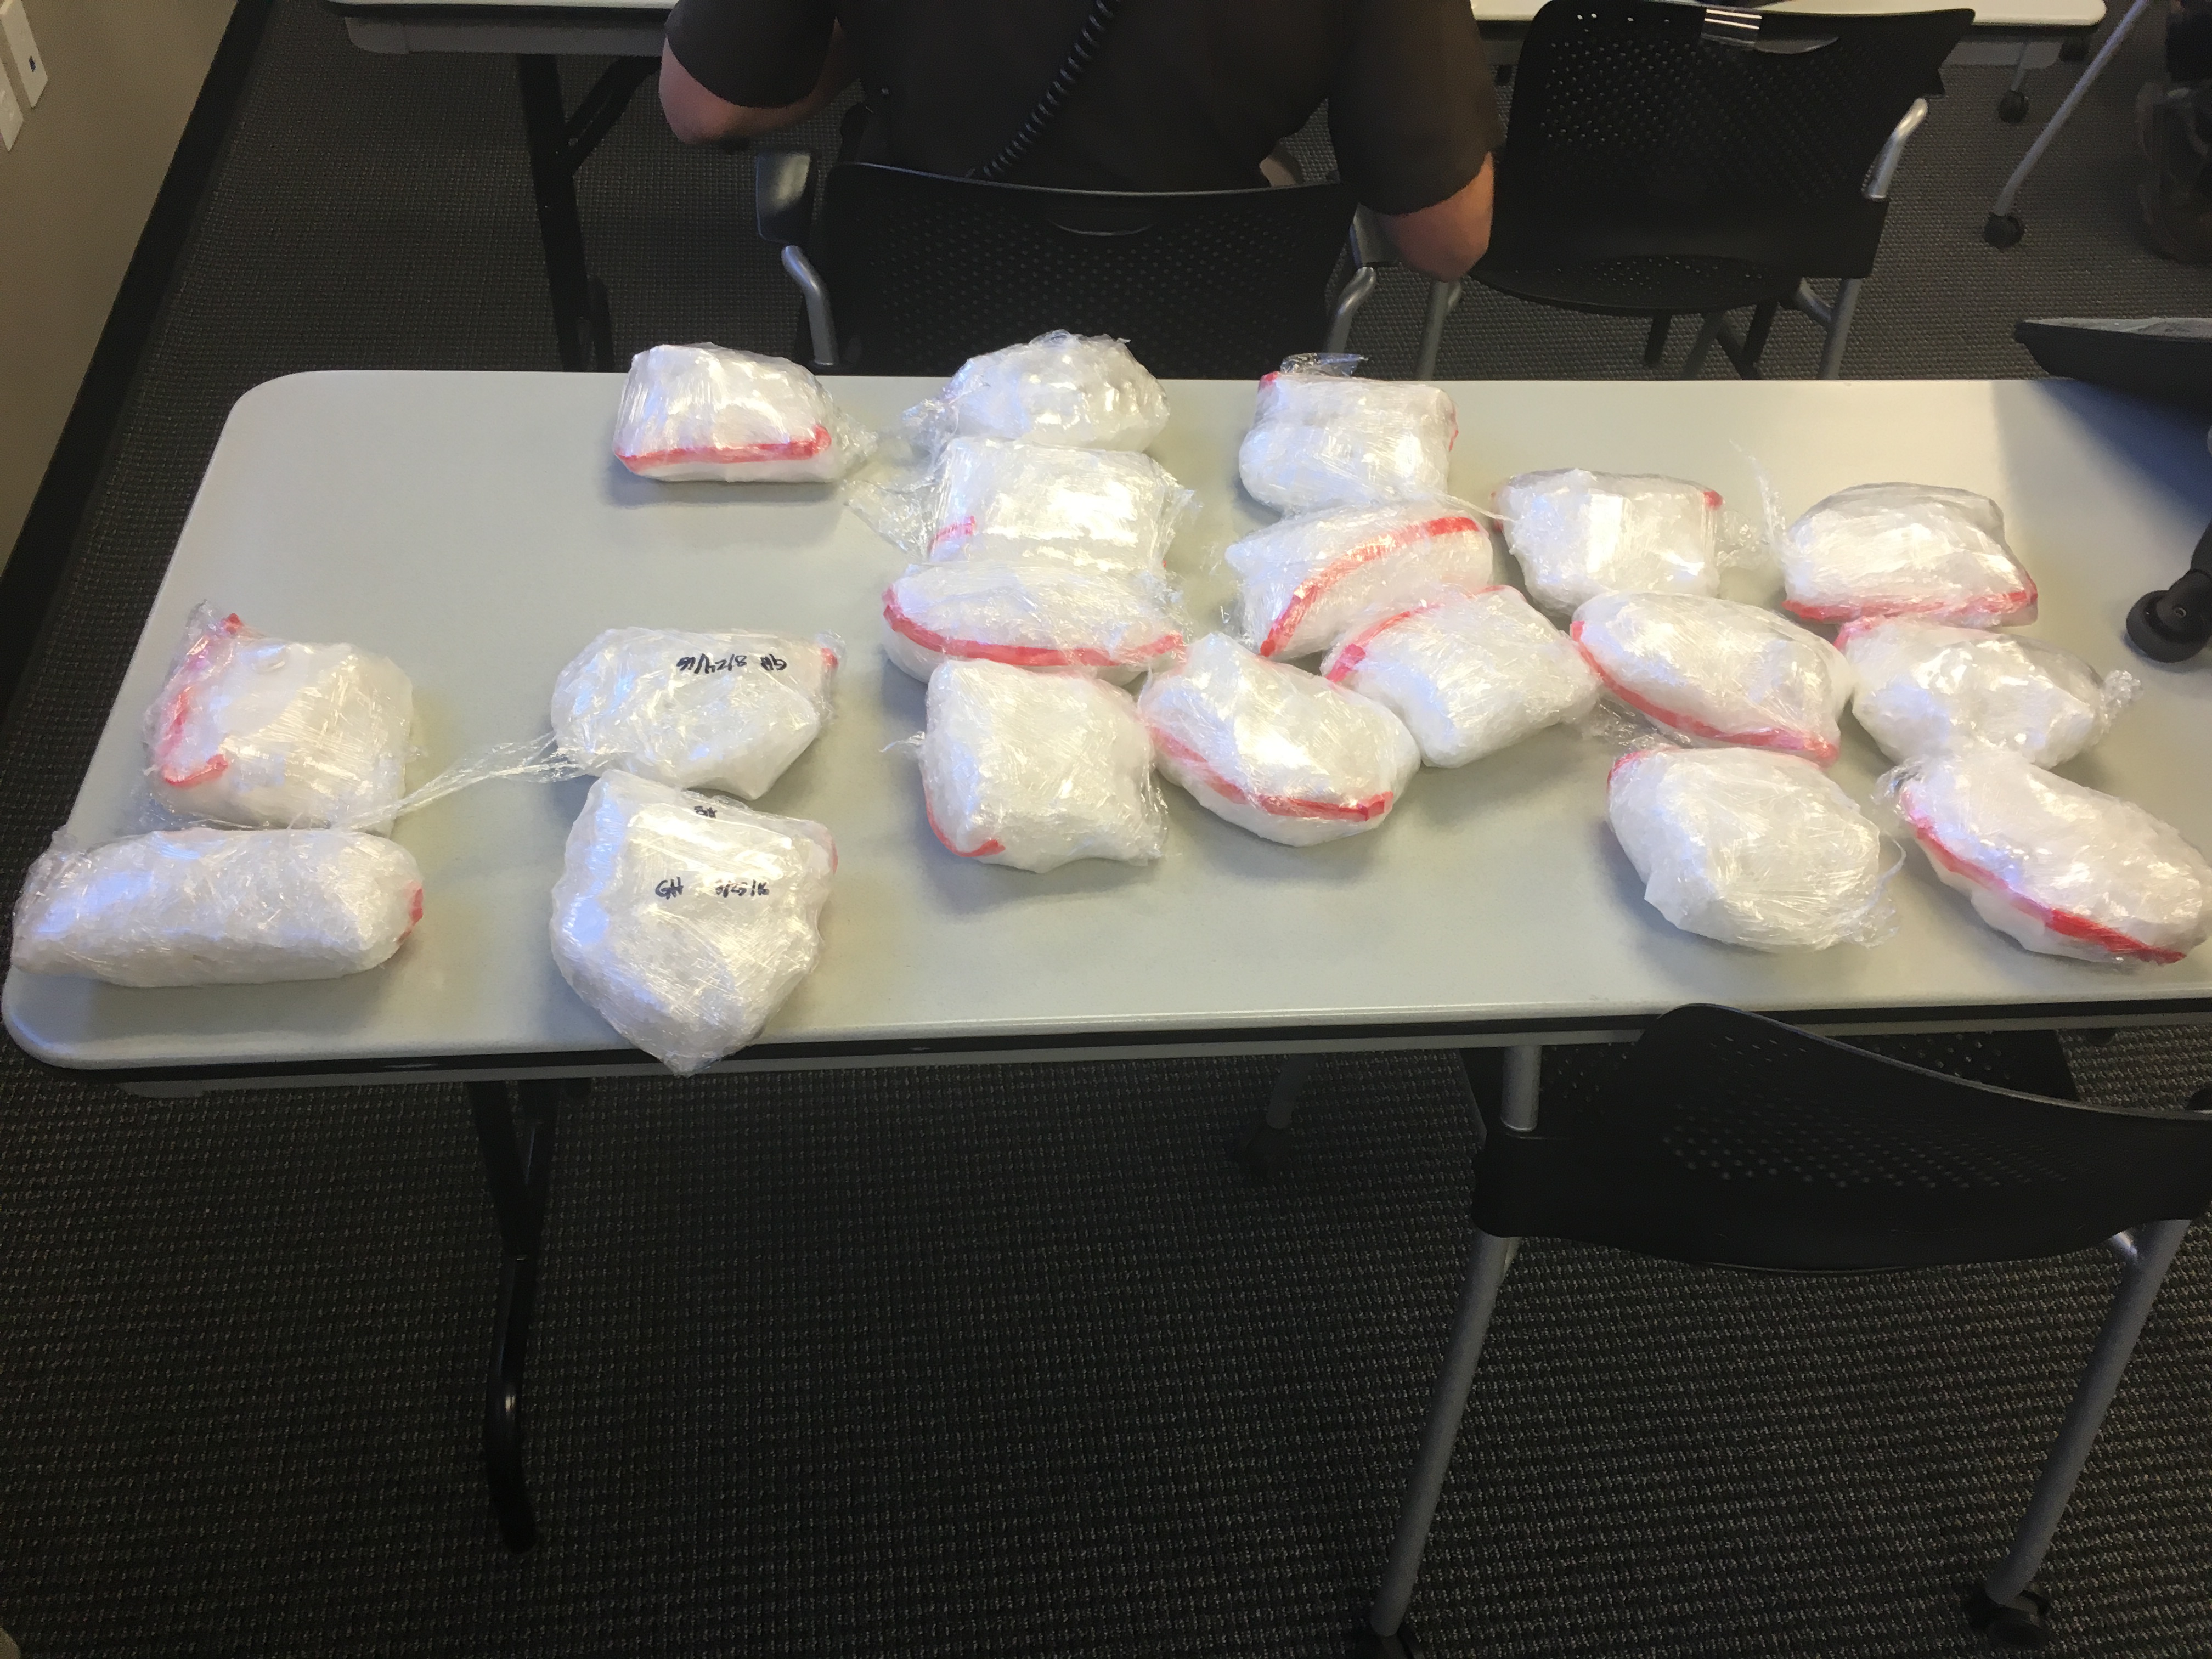 The Utah Highway Patrol on Thursday made a traffic stop that resulted in the discovery of 20 pounds of methamphetamine. Photo: UHP